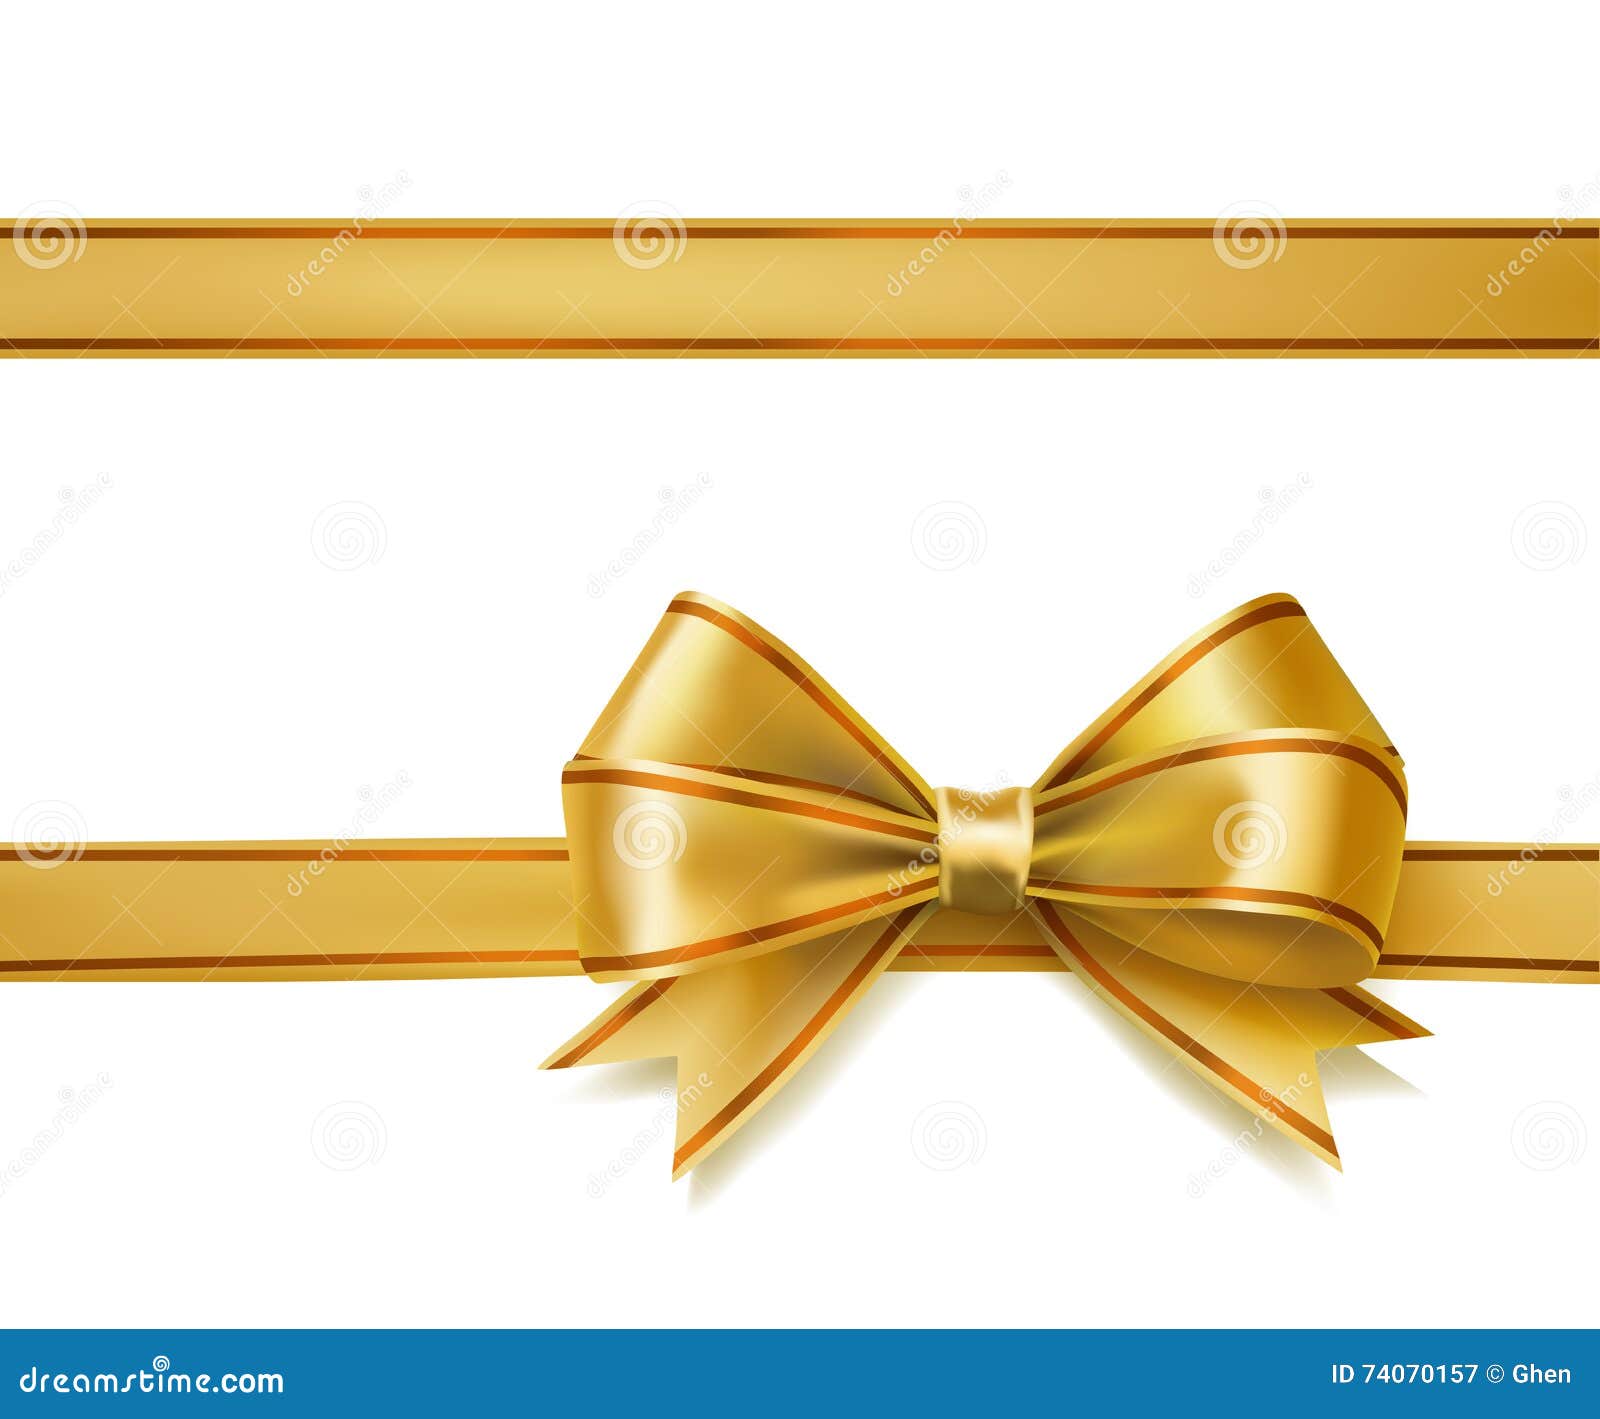 Golden Ribbon Bow PNG Image, Gold Bow Ribbon Shining Golden Present  Decoration Gift Symbol Of Christmas New Years Celebration Birthday, New  Year Clipart, Christmas Clipart, Gold Bow PNG Image For Free Download